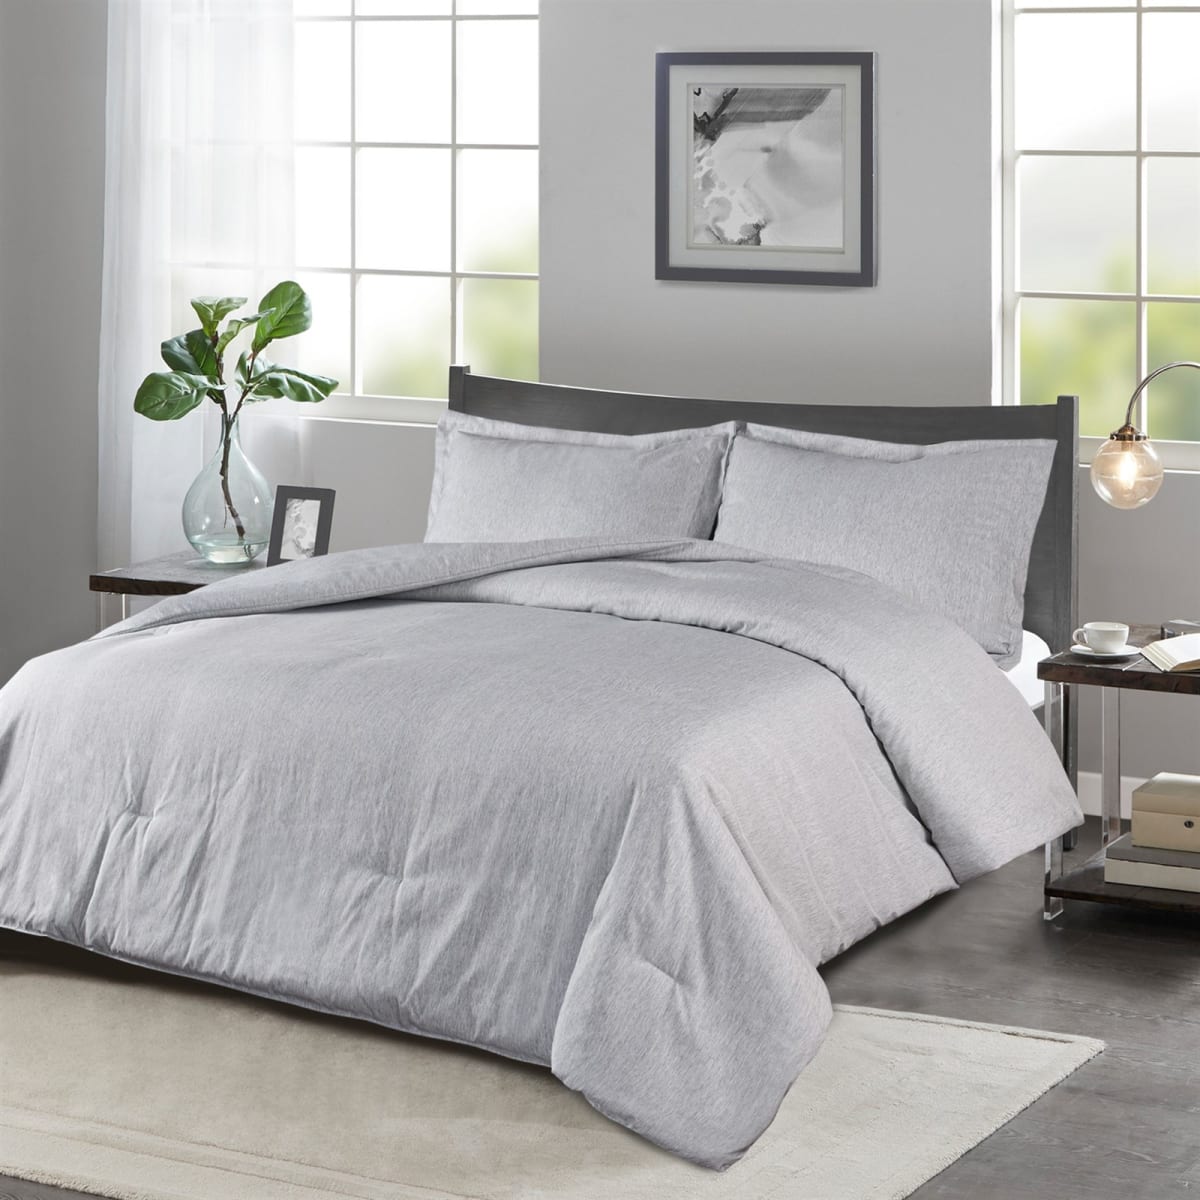 Modern Cationic Dyeing Comforter Set – Only $45.99! - Pinching Your Pennies